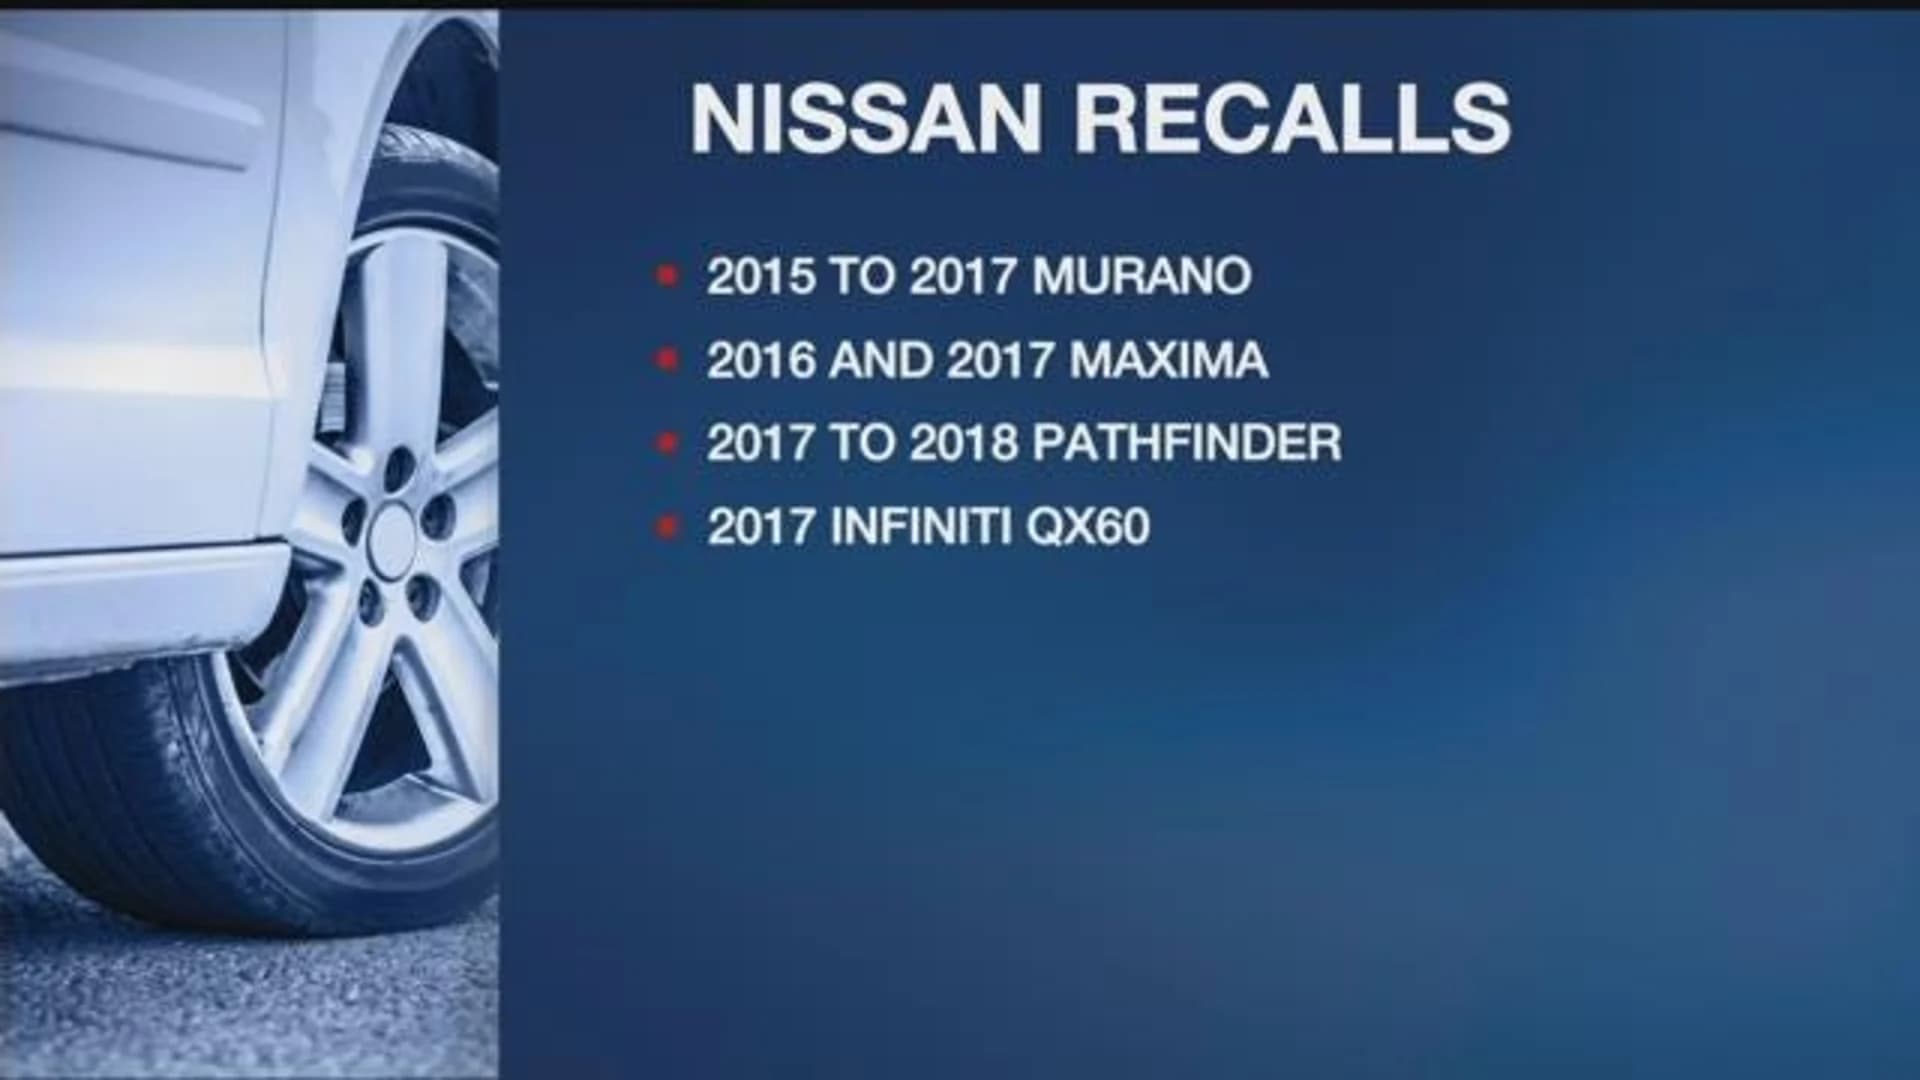 Nissan recalls cars, SUVs due to risk of fire